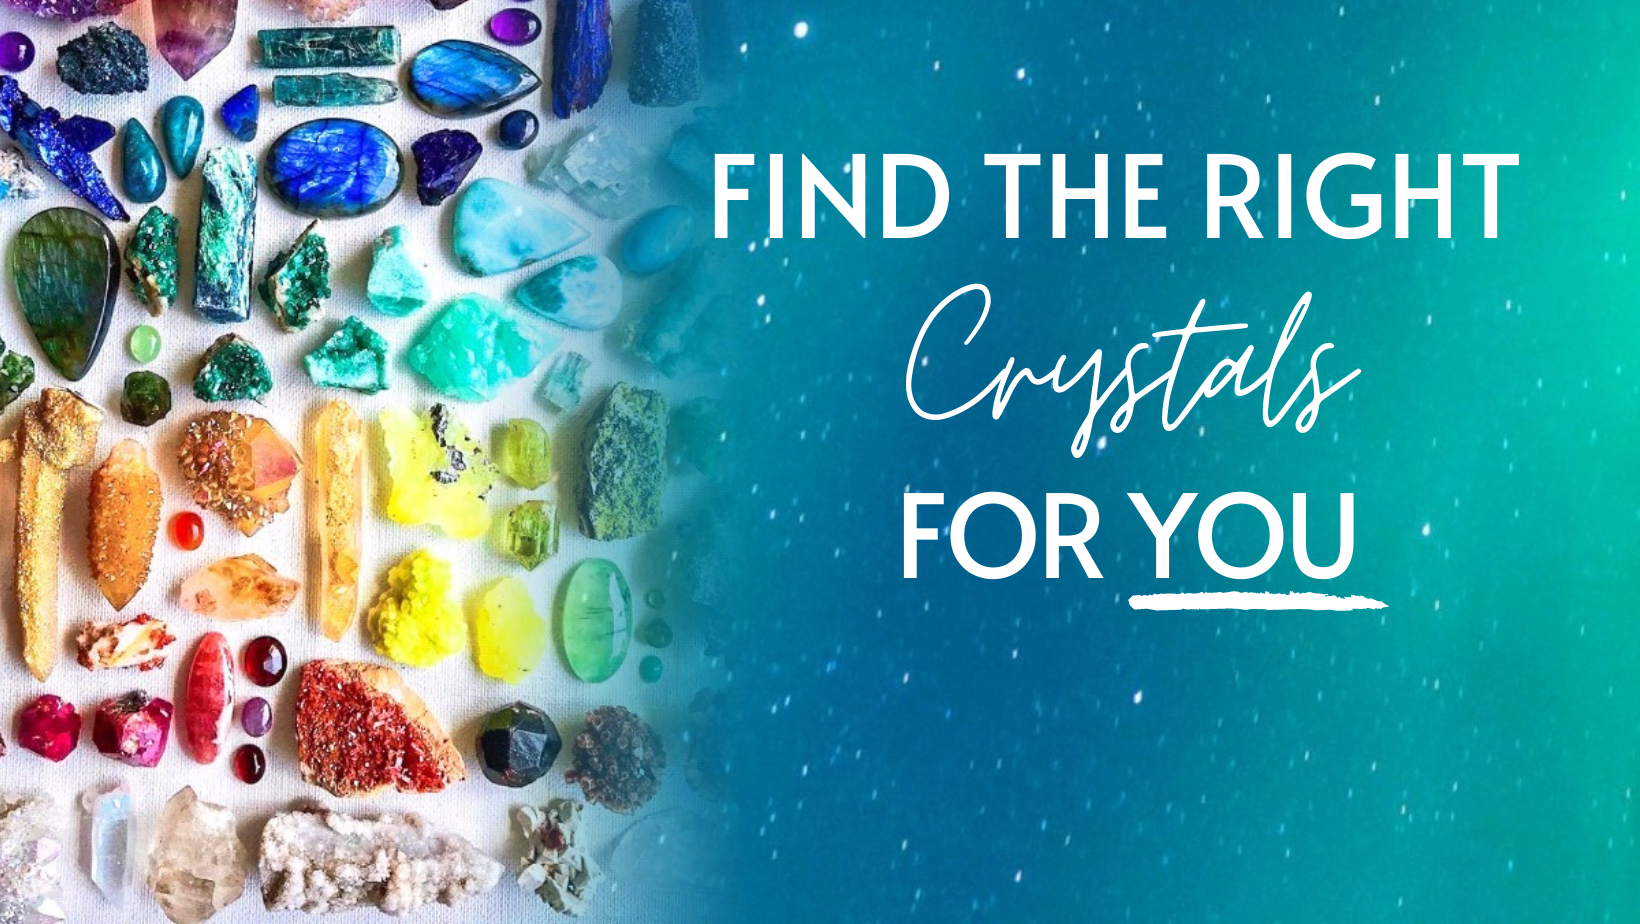 Magic Crystals focus on finding the stone to help you provide the right energy. Our gemstone jewelry line comes with a special and unique energy. Buy from the best C